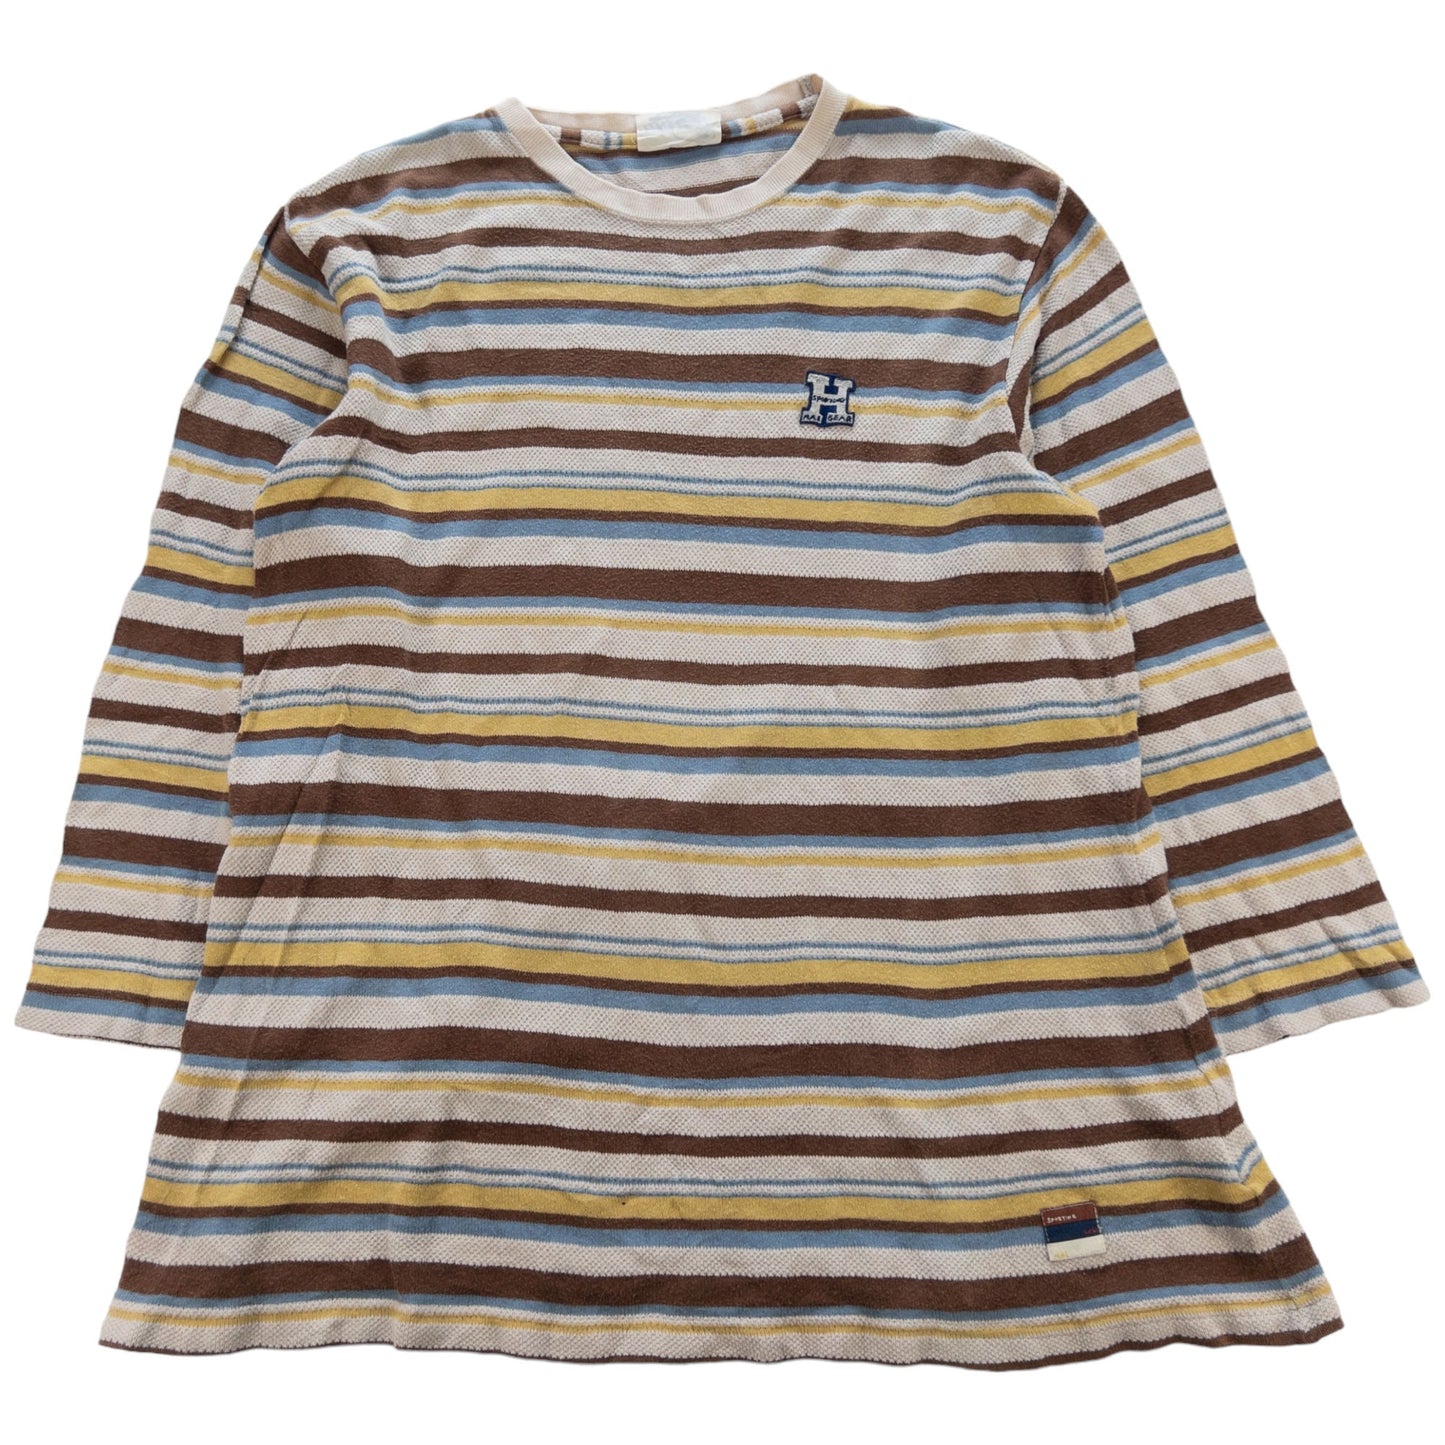 Vintage Hai Sporting Gear By Issey Miyake Striped Top Size M